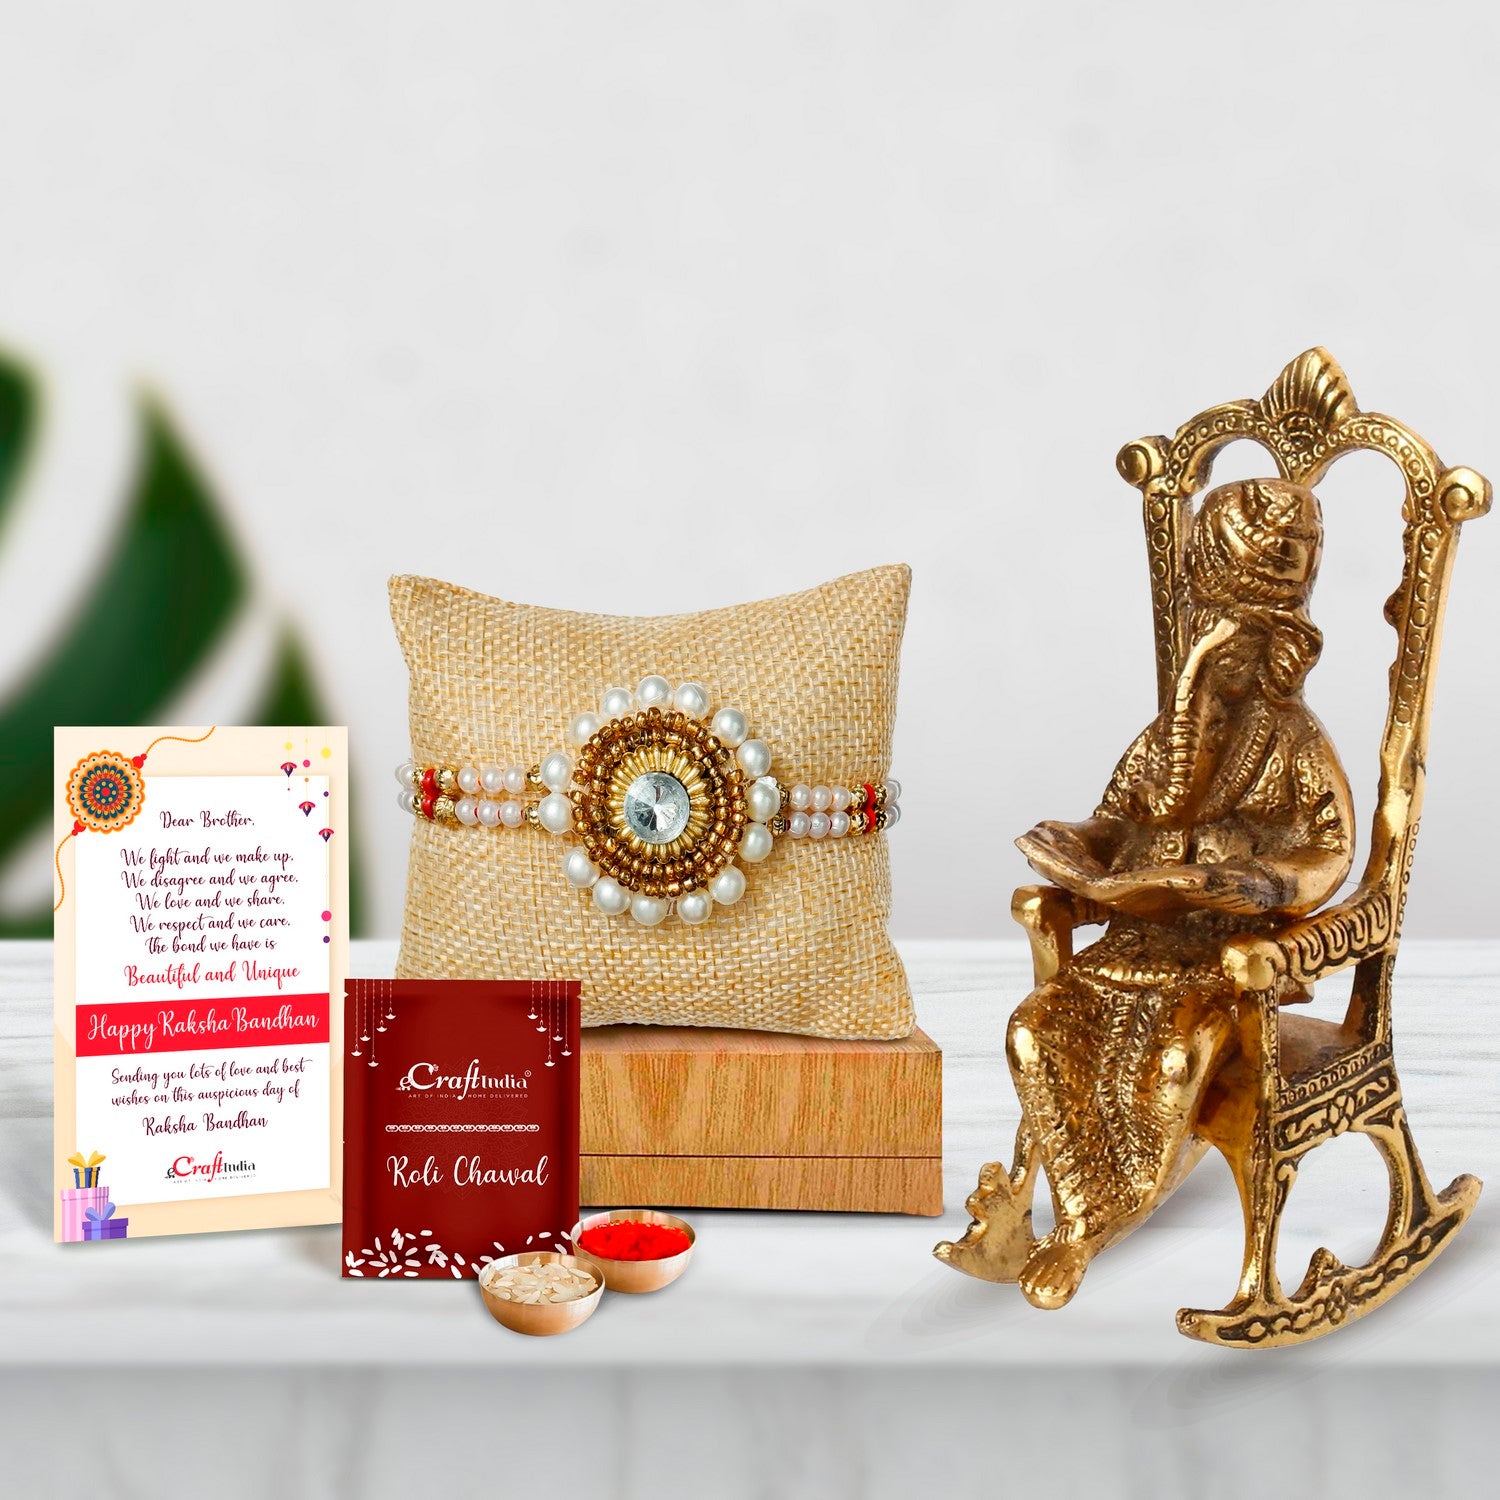 Designer Handcrafted Stone Pearl Rakhi with Lord Ganesha on Rocking Chair Antique Showpiece and Roli Chawal Pack, Best Wishes Greeting Card